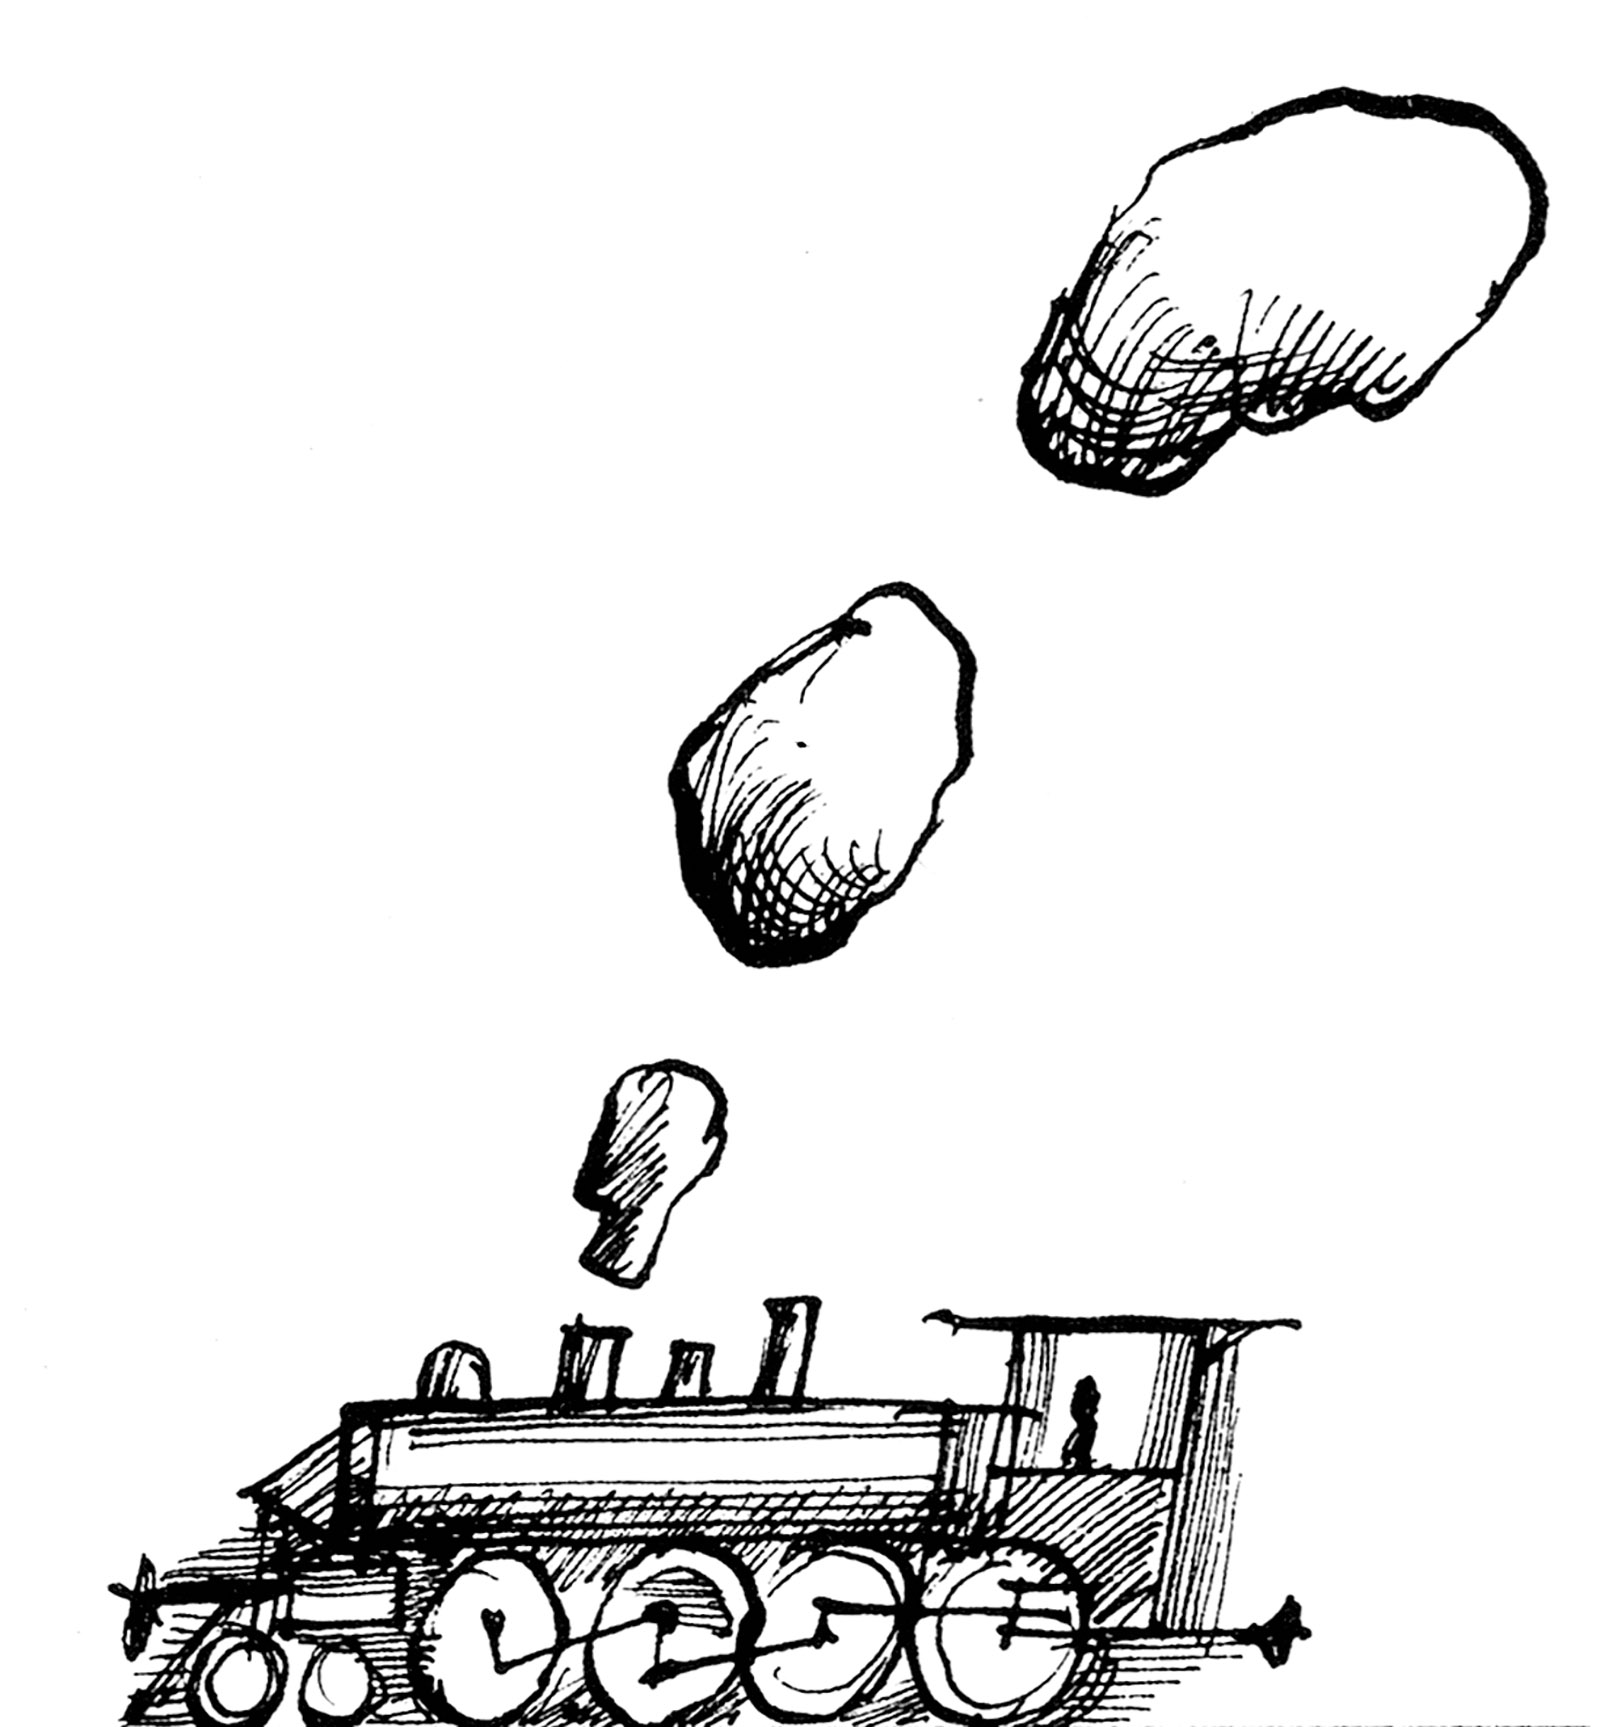 Drawing of a steam engine